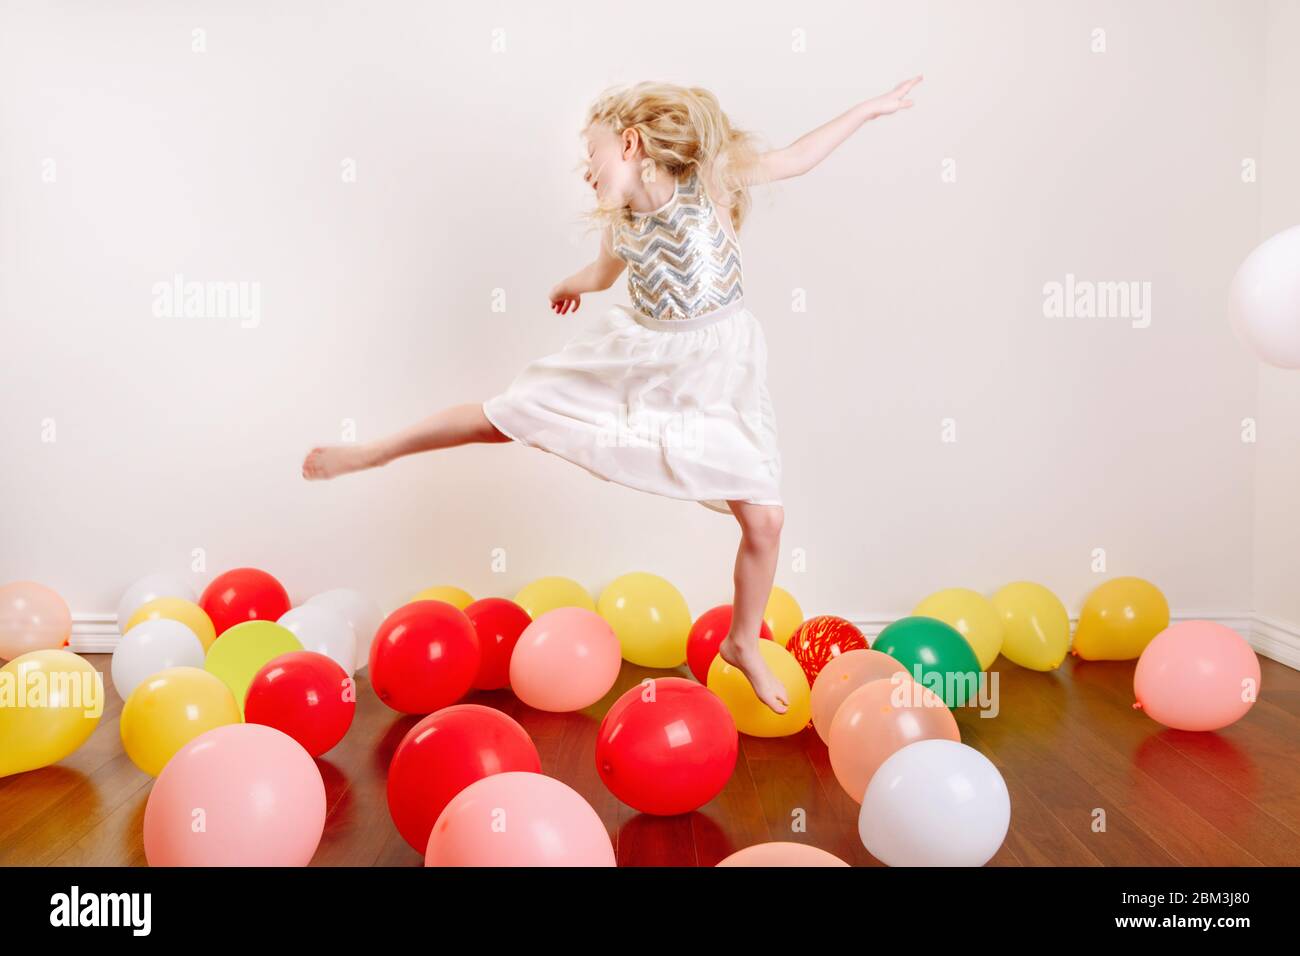 Cute adorable little girl celebrating birthday at home. Lovely girl child with colorful balloons having fun. Quarantine birthday party at home alone d Stock Photo